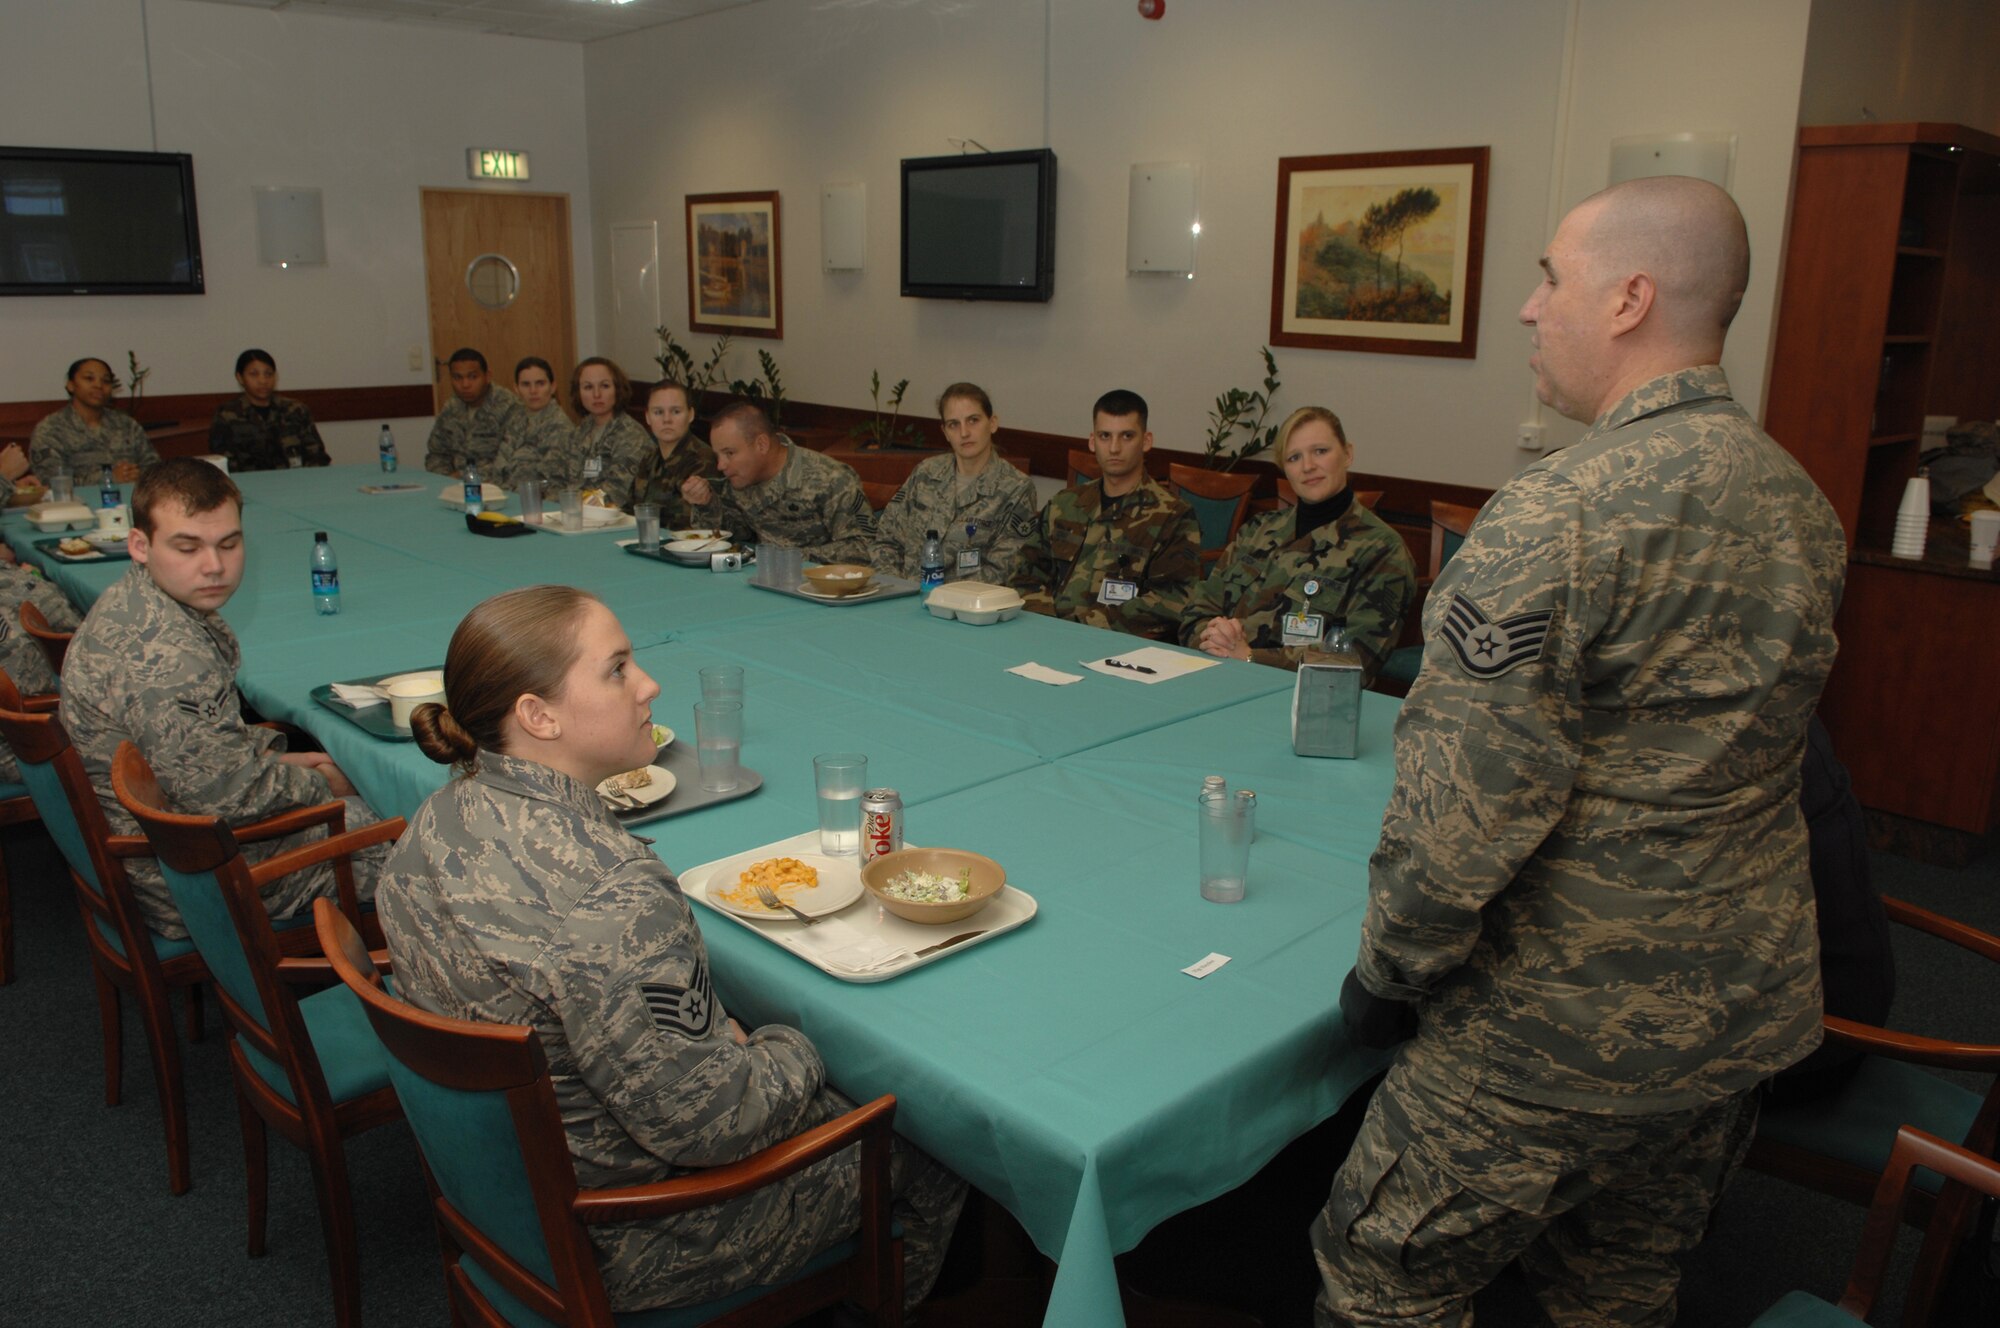 Staff Sgt. Matthew Slaydon talks to a group of Air Force service members working at Landstuhl Regional Medical Center over lunch at the LRMC Dining Facility, Landstuhl Regional Medical Center, Germany, Nov. 21, 2008. Sgt. Slaydon was severely injured in Iraq 13 months ago during a deployment there as an explosive ordinance disposal technician and is visiting LRMC as part of a morale tour, following his recovery. (U.S. Air Force photo by Airman 1st Class Tony R. Ritter)